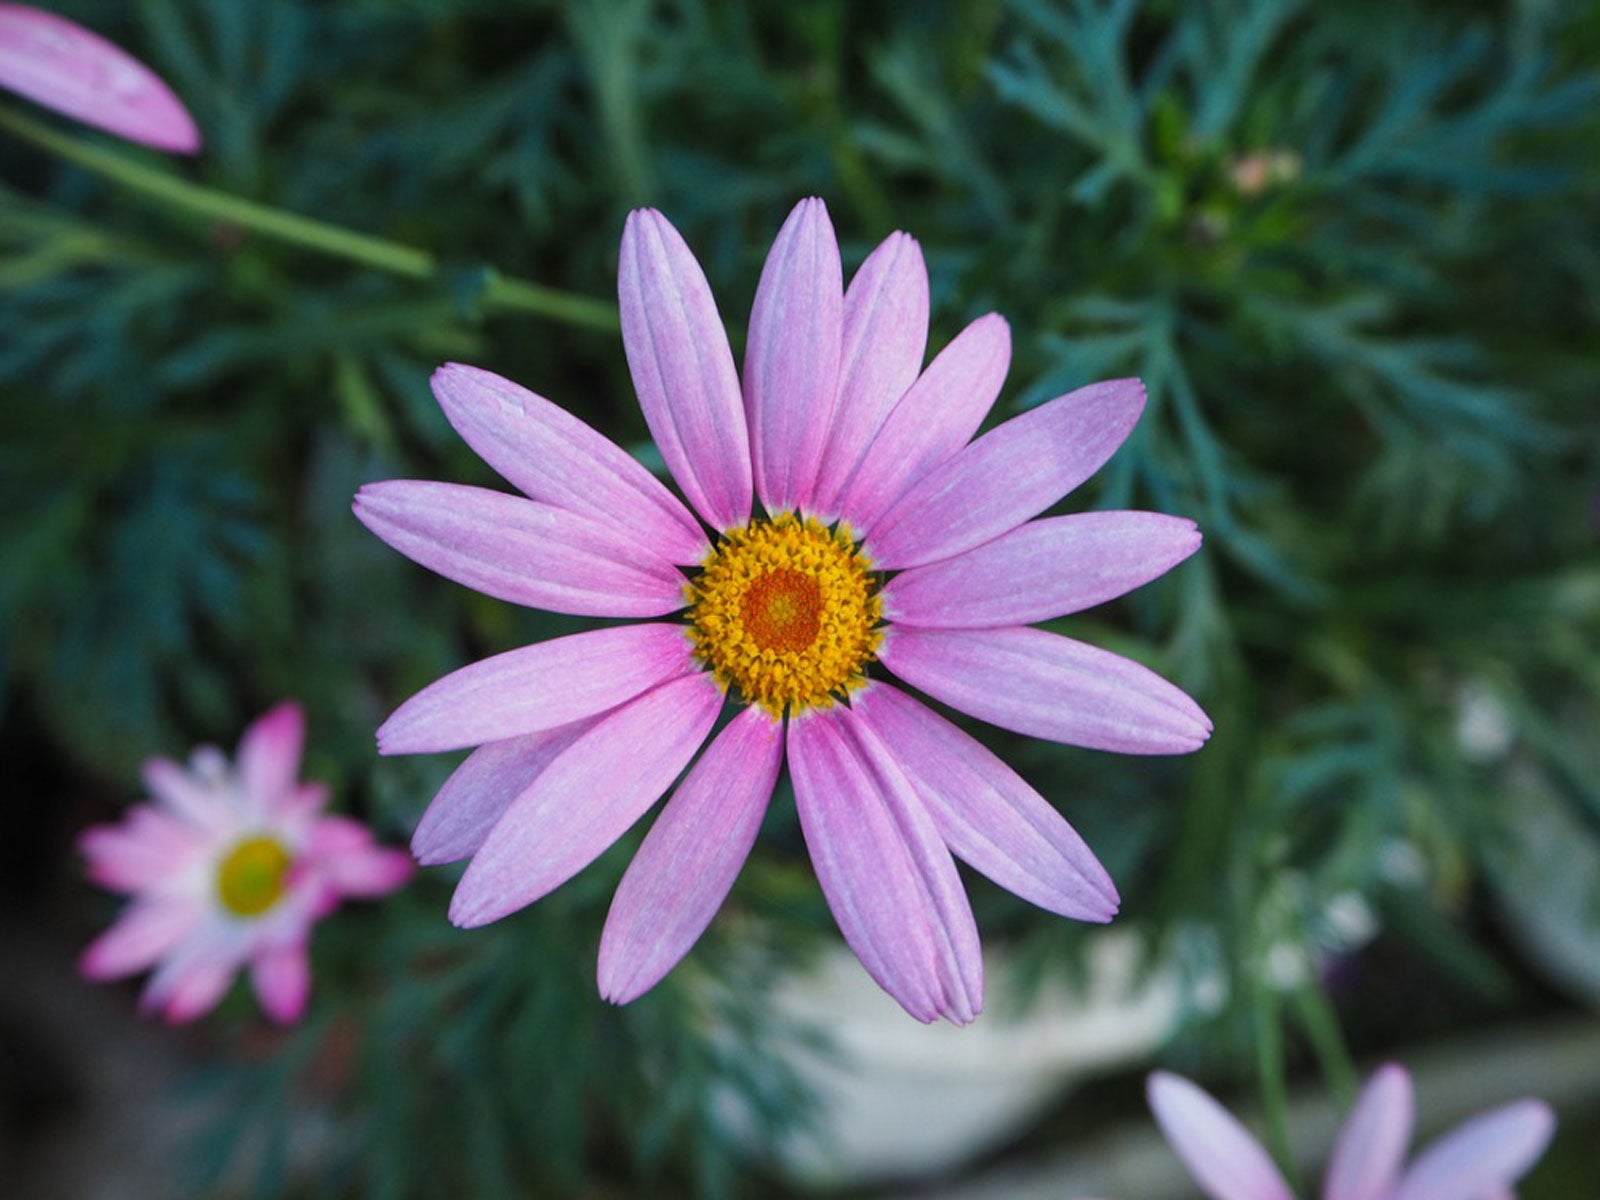 care of marguerite daisies - info on marguerite daisy growing